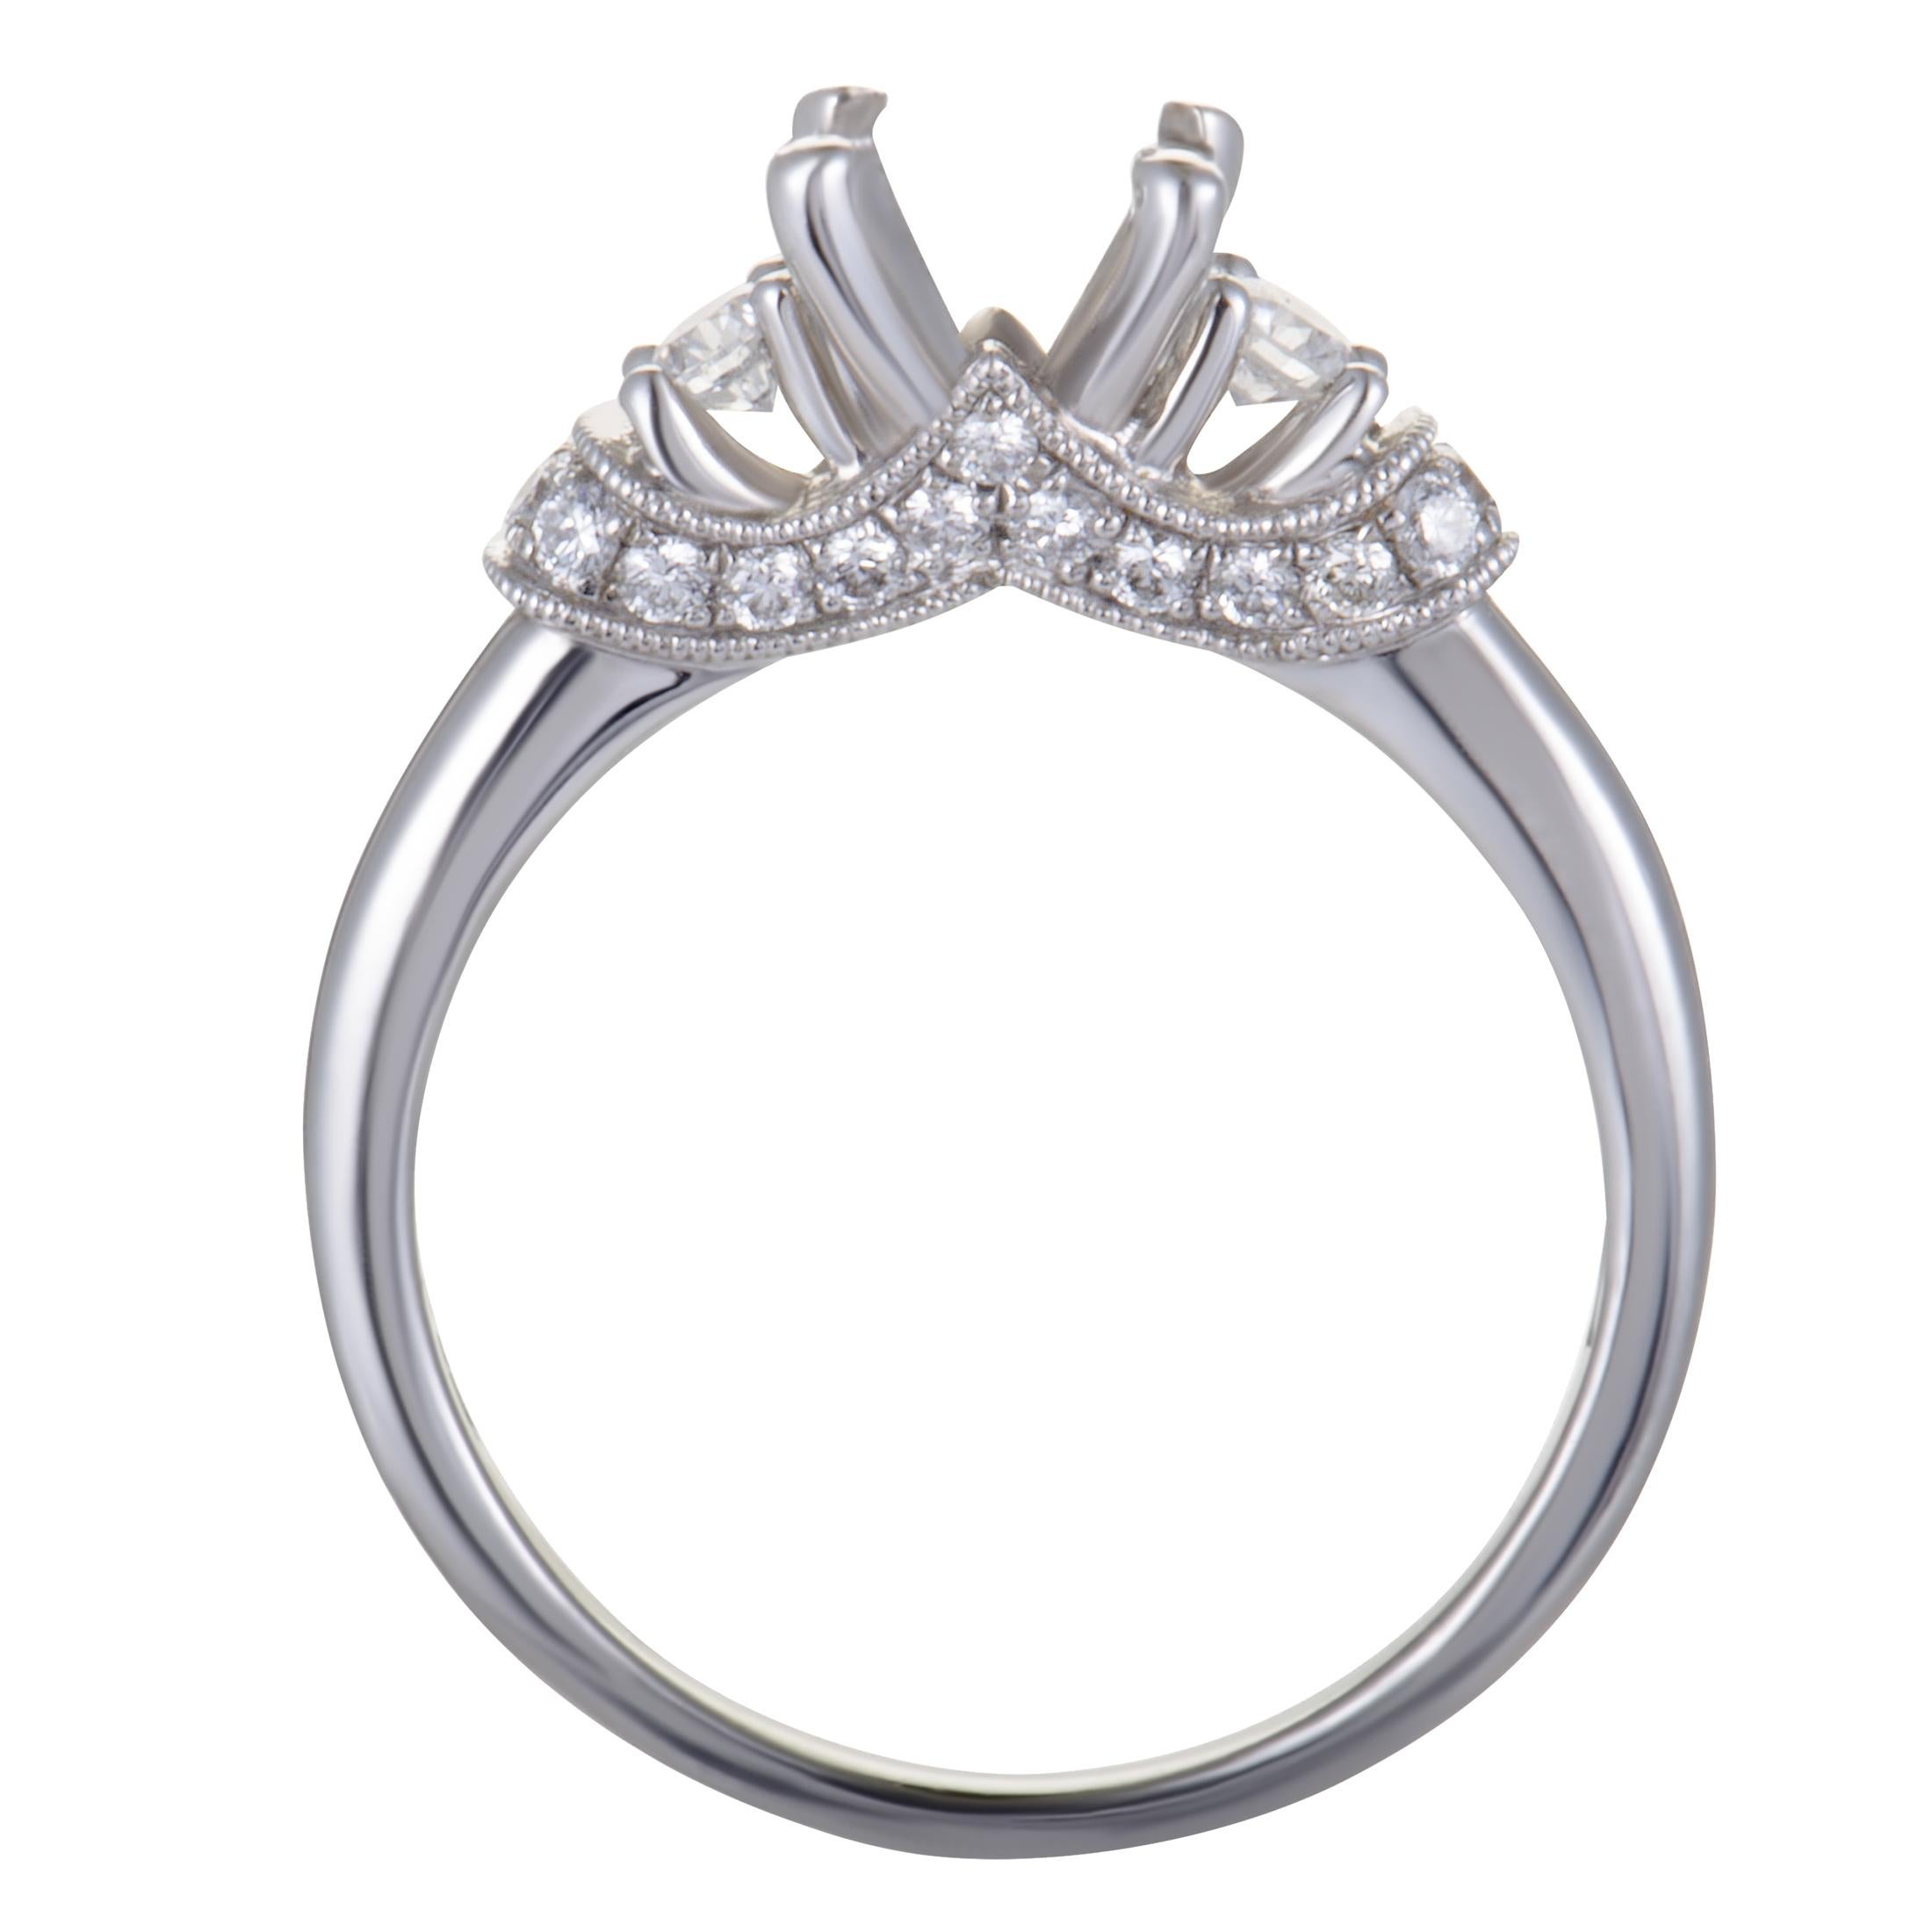 Presented by Scott Kay, this superb mounting ring is made of classy 14K white gold and features a wonderfully refined design. The ring is embellished with sparkly diamonds that weigh in total 0.38 carats.
 Ring Top Dimensions: 14mm x 6mm